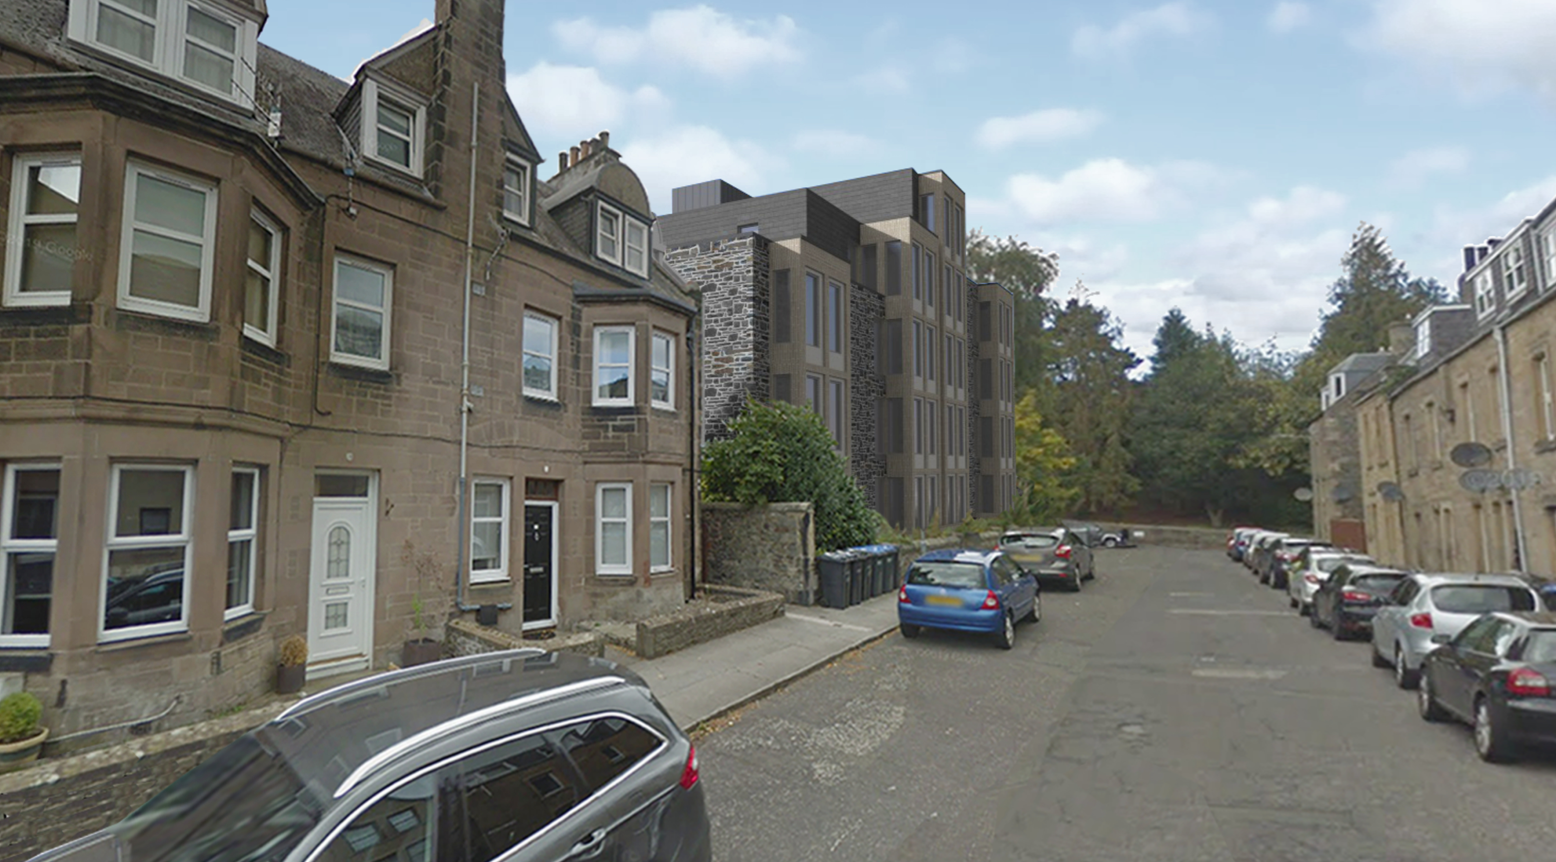 Plans approved for new housing blocks at former Galashiels church site